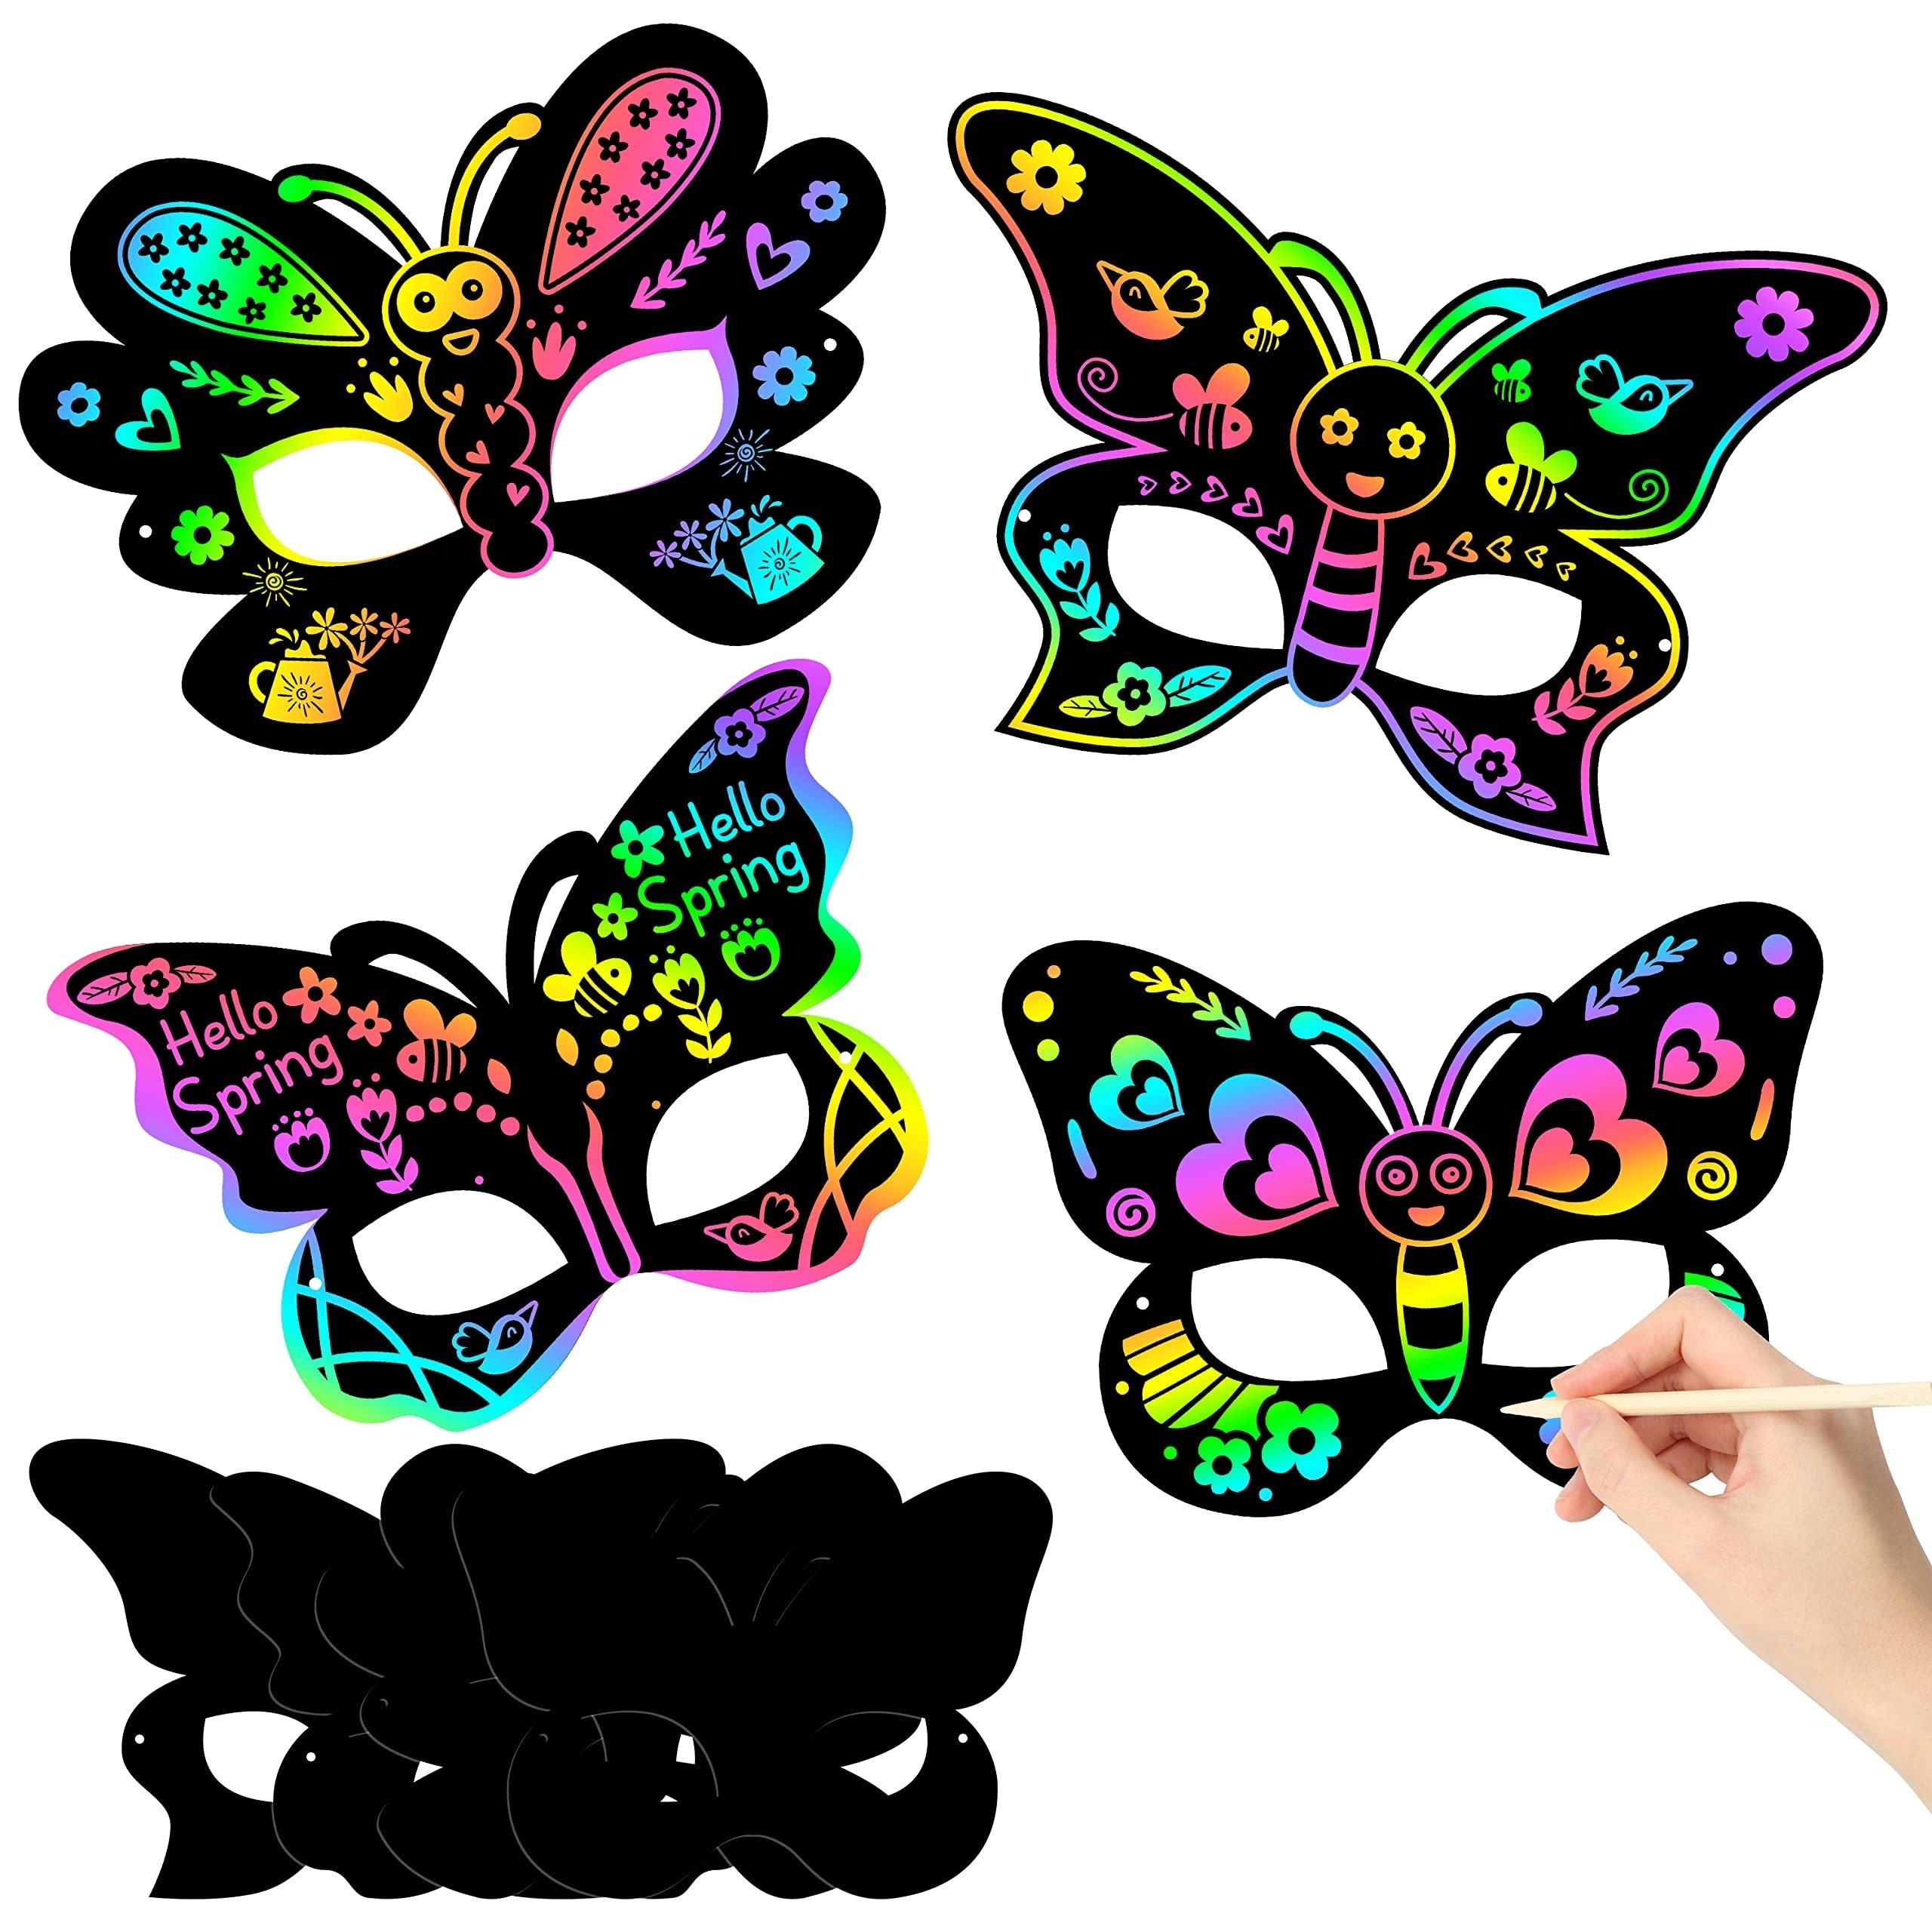 

24 Pcs Butterfly Scratch Paper Masks - Rainbow Art Craft Kit With Wooden Stylus & Ribbons, Diy Party Favors For Mardi Gras, Halloween, Easter, And Birthday Celebrations - Paper Material